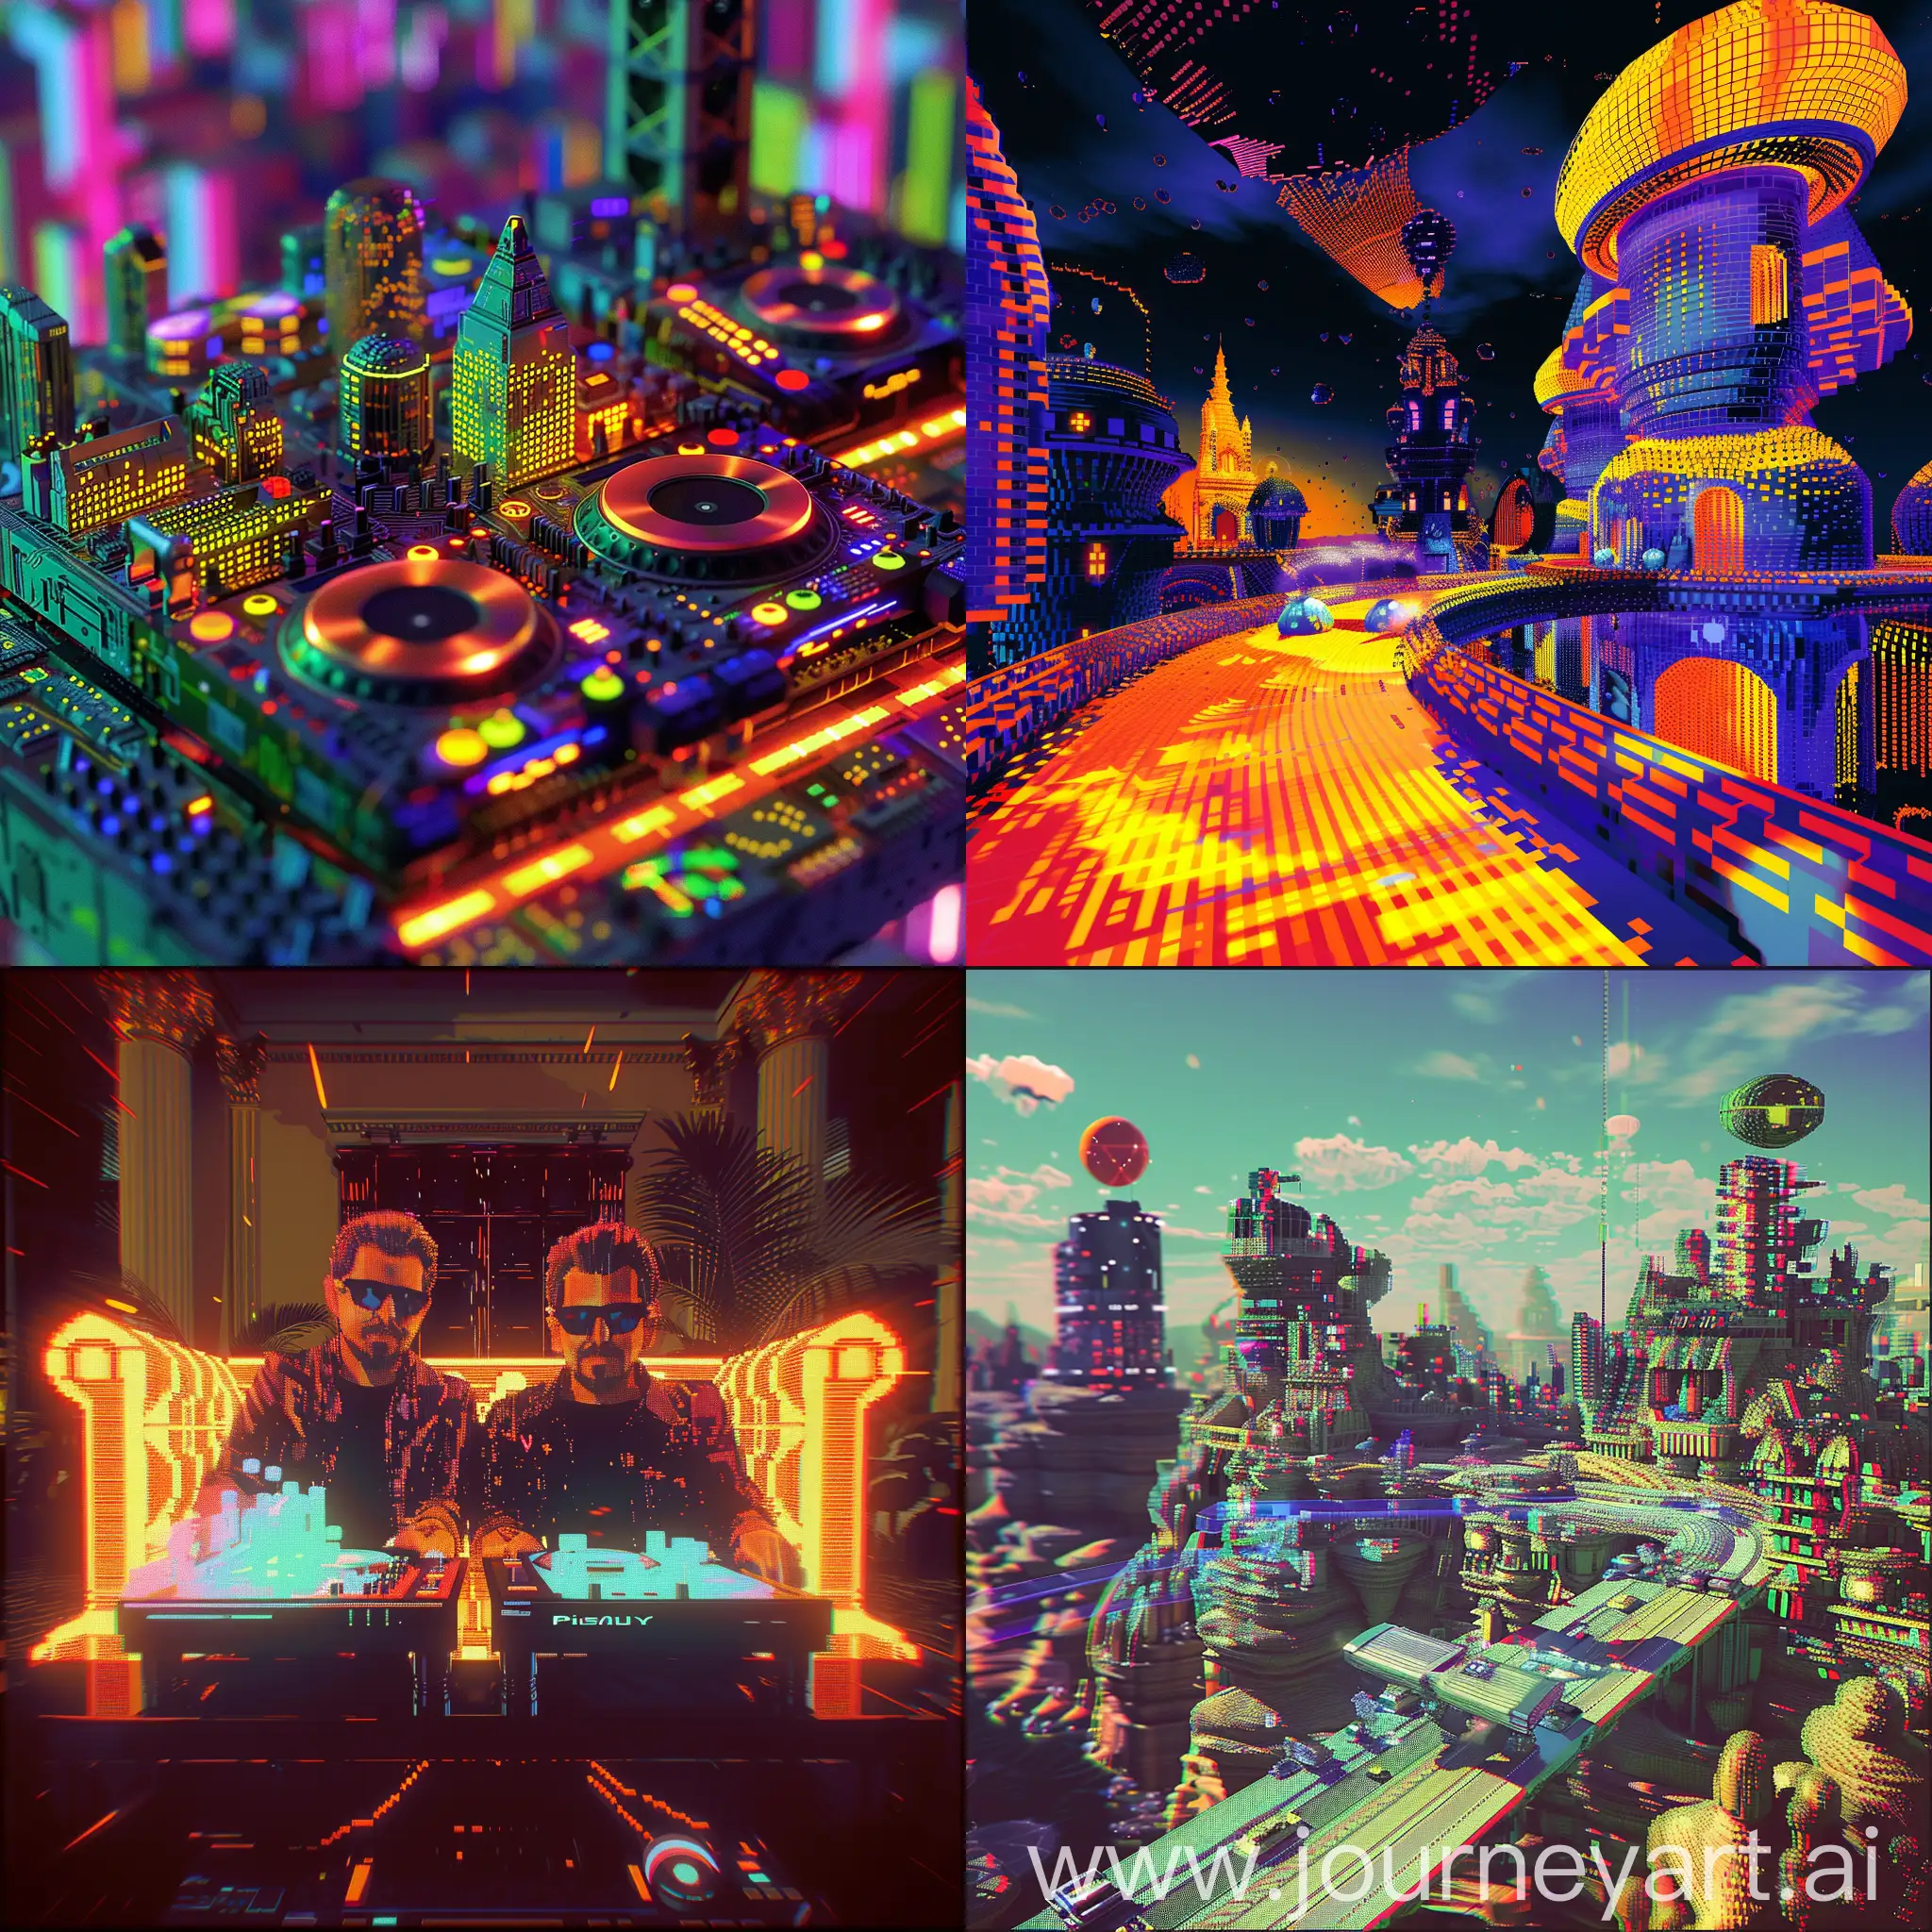 Dimitri-Vegas-and-Like-Mike-in-Pixelated-Glitch-Art-on-Retro-Gaming-Console